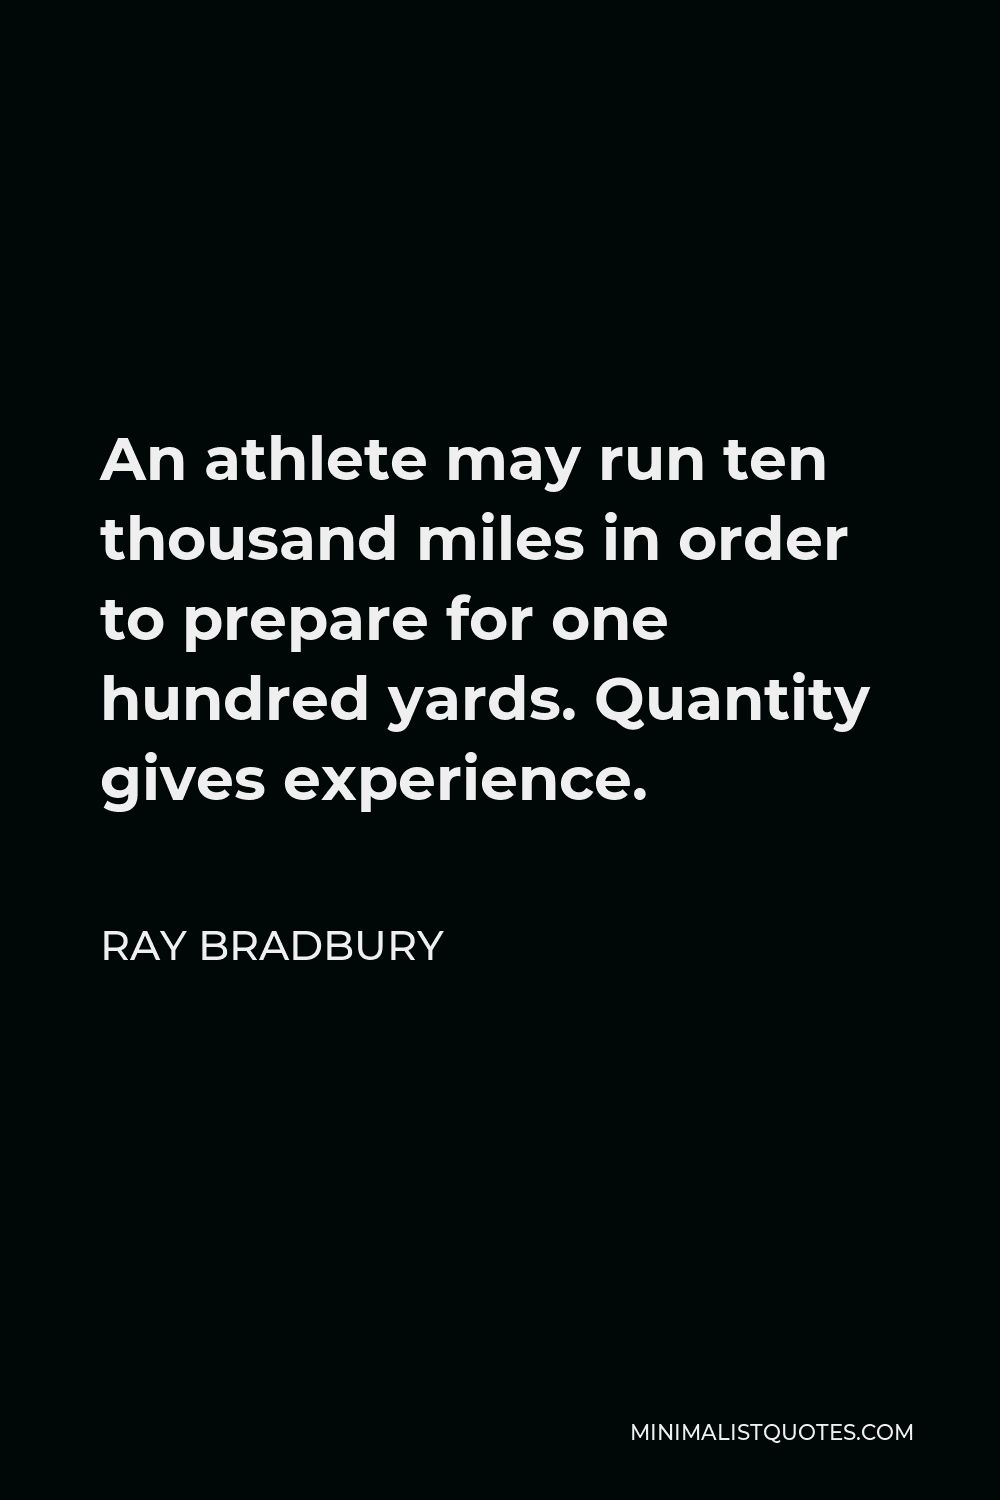 Ray Bradbury Quote - An athlete may run ten thousand miles in order to prepare for one hundred yards. Quantity gives experience.